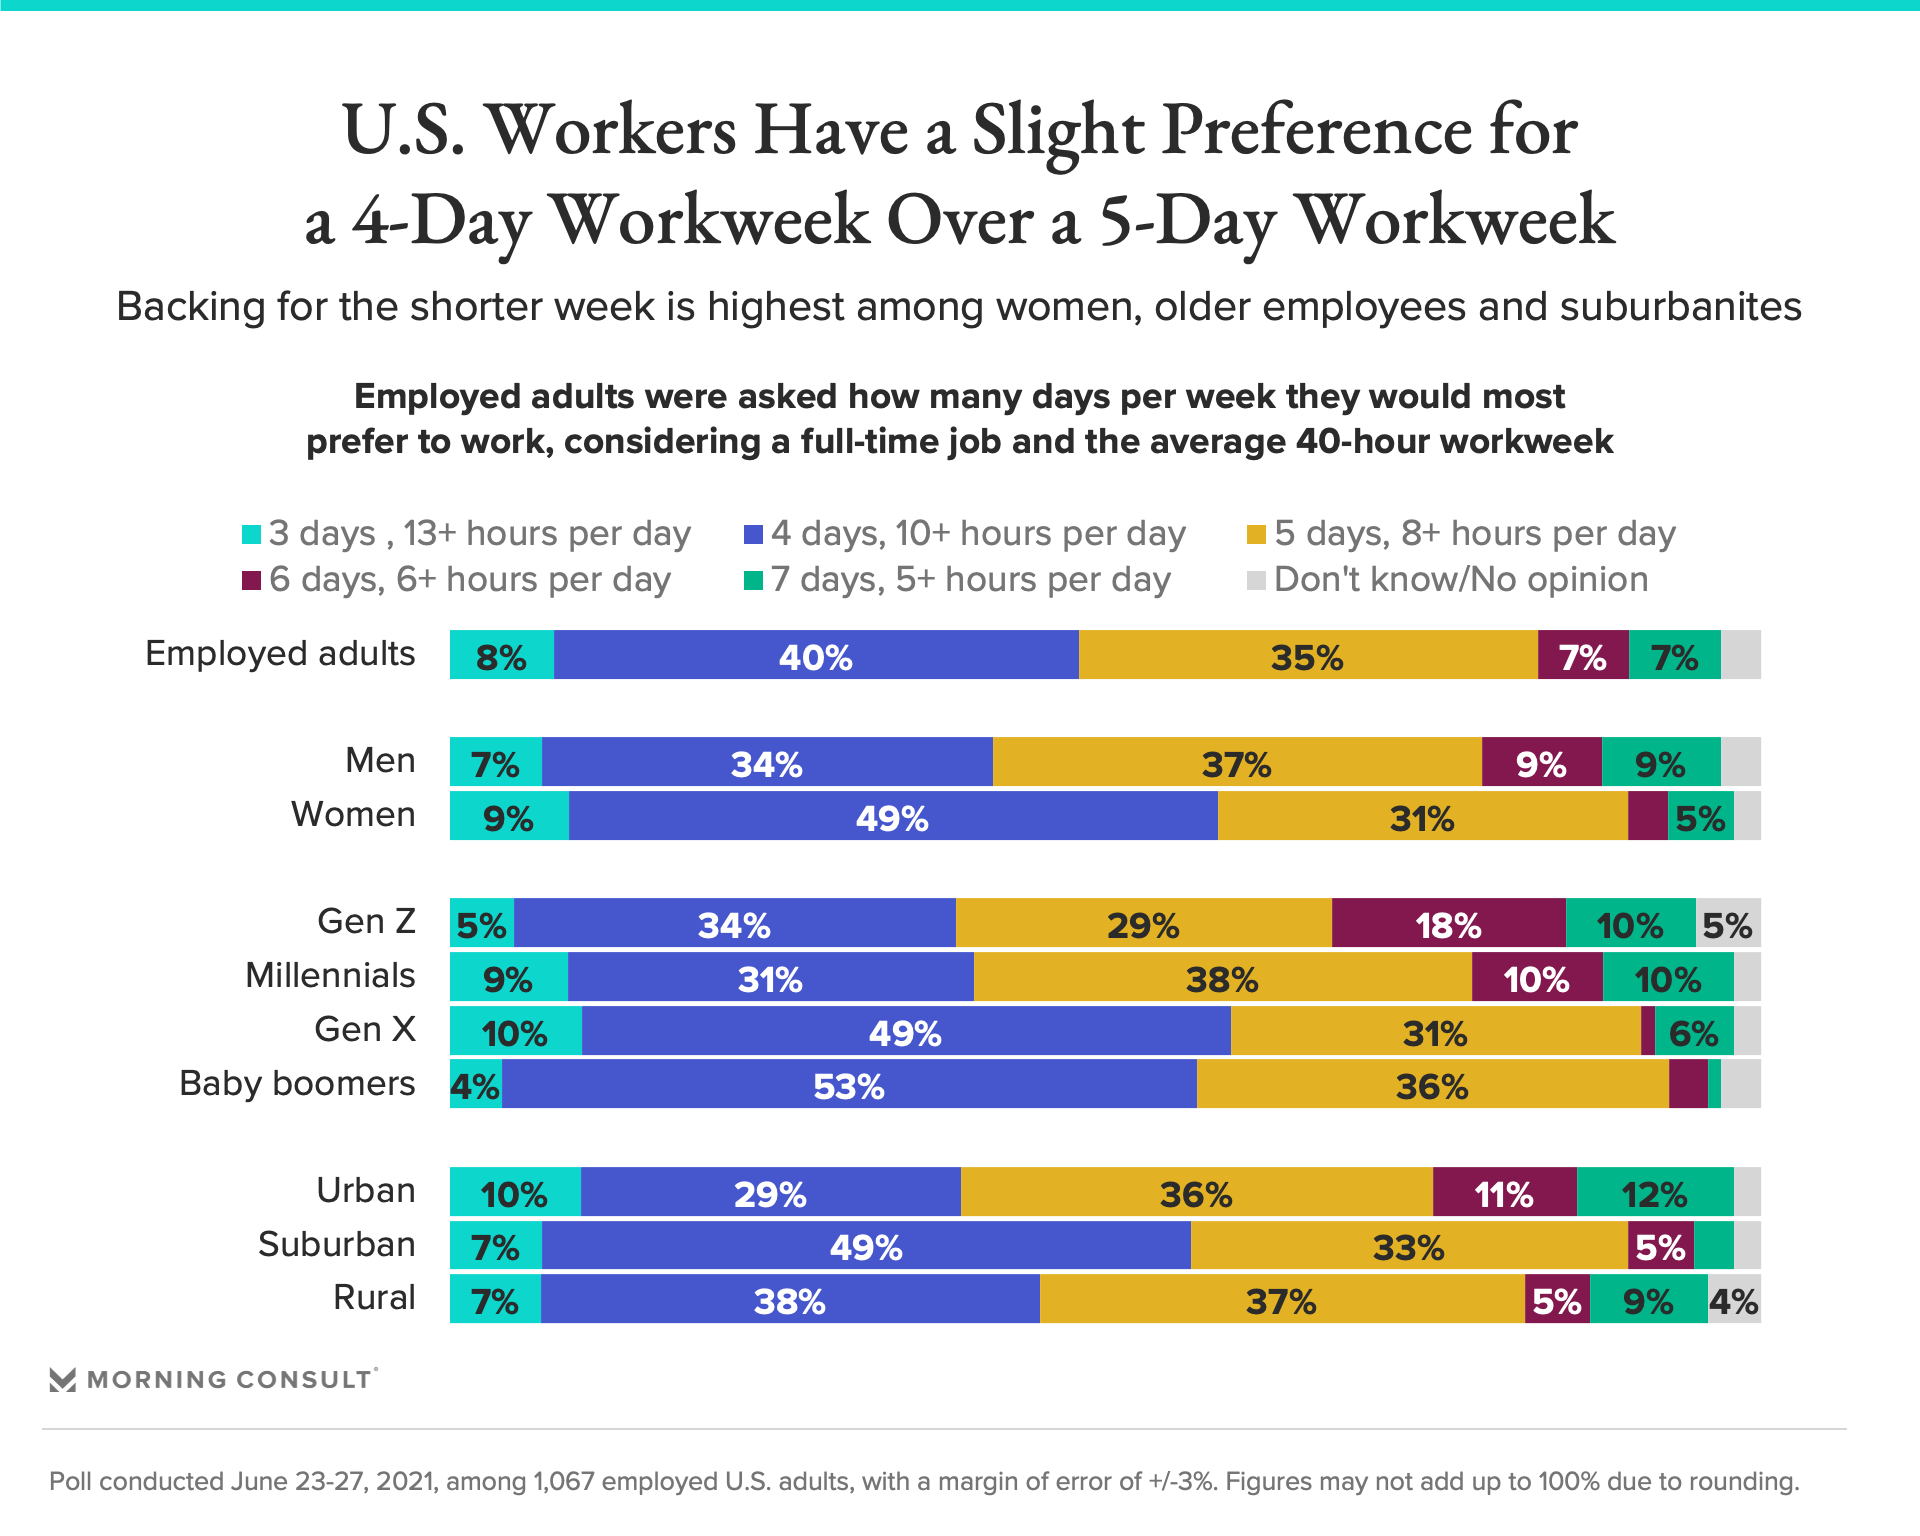 A 4Day Workweek Appeals to 40 of U.S. Workers. But a 5Day Workweek